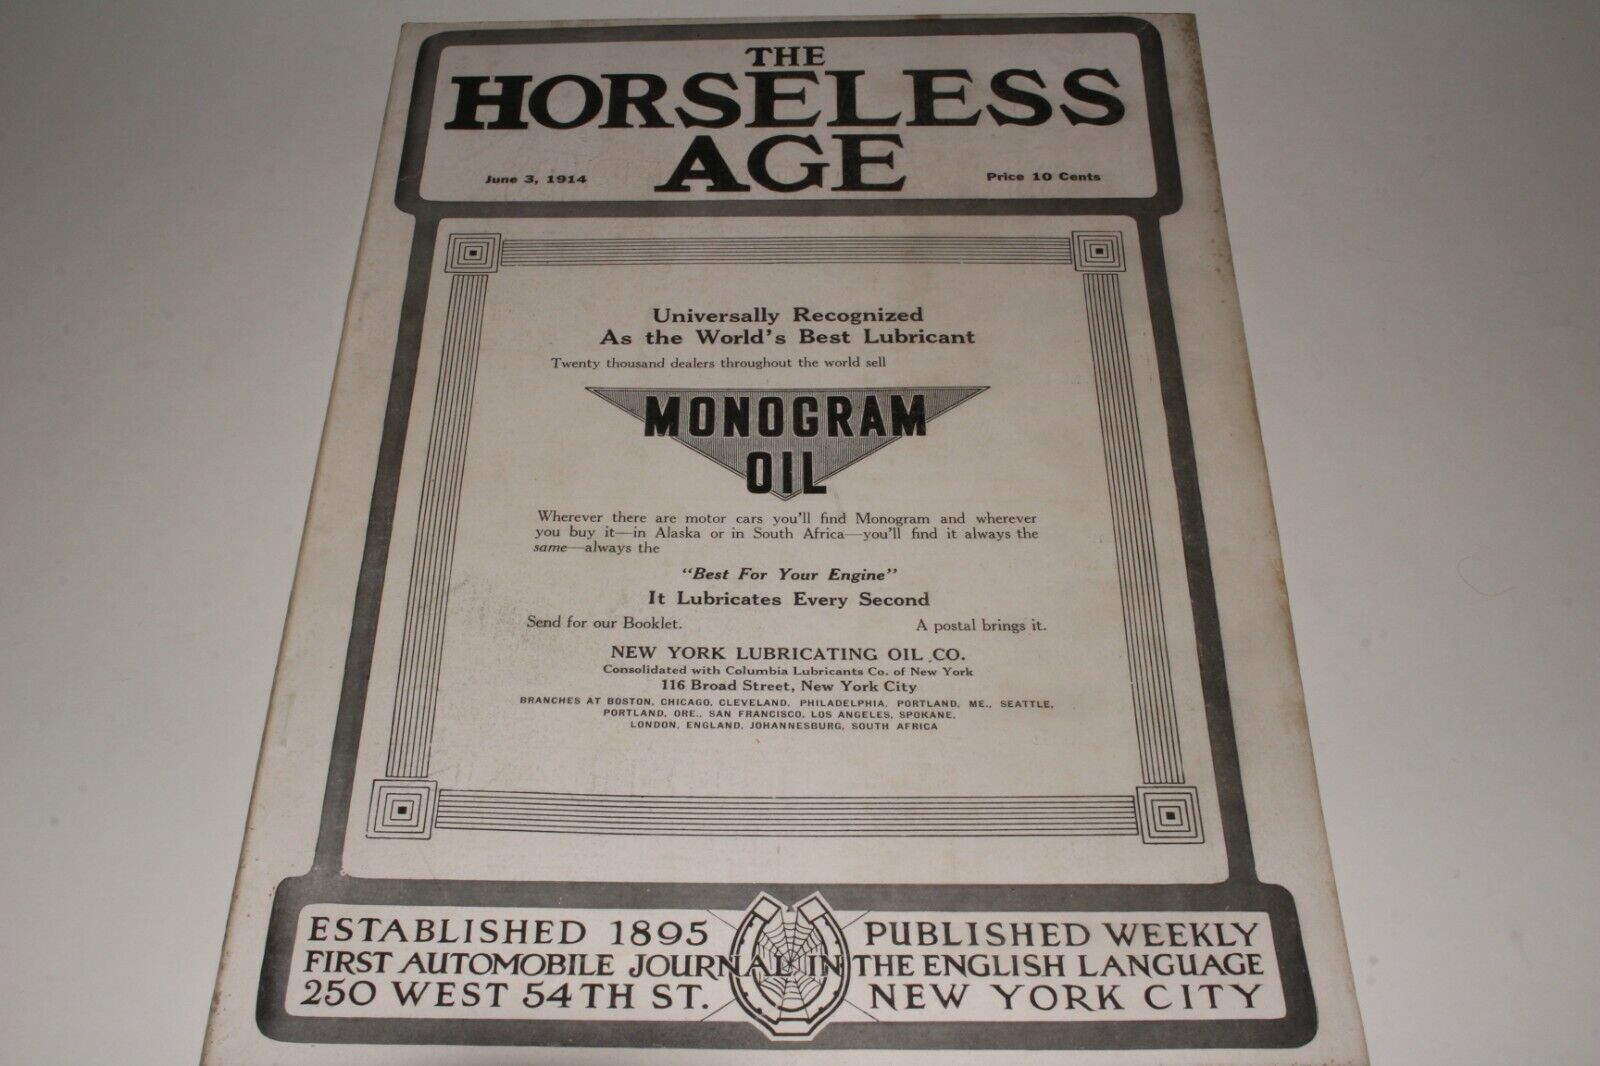 THE HORSELESS AGE MAGAZINE JUNE 3, 1914; VOLUME 33 NUMBER 22